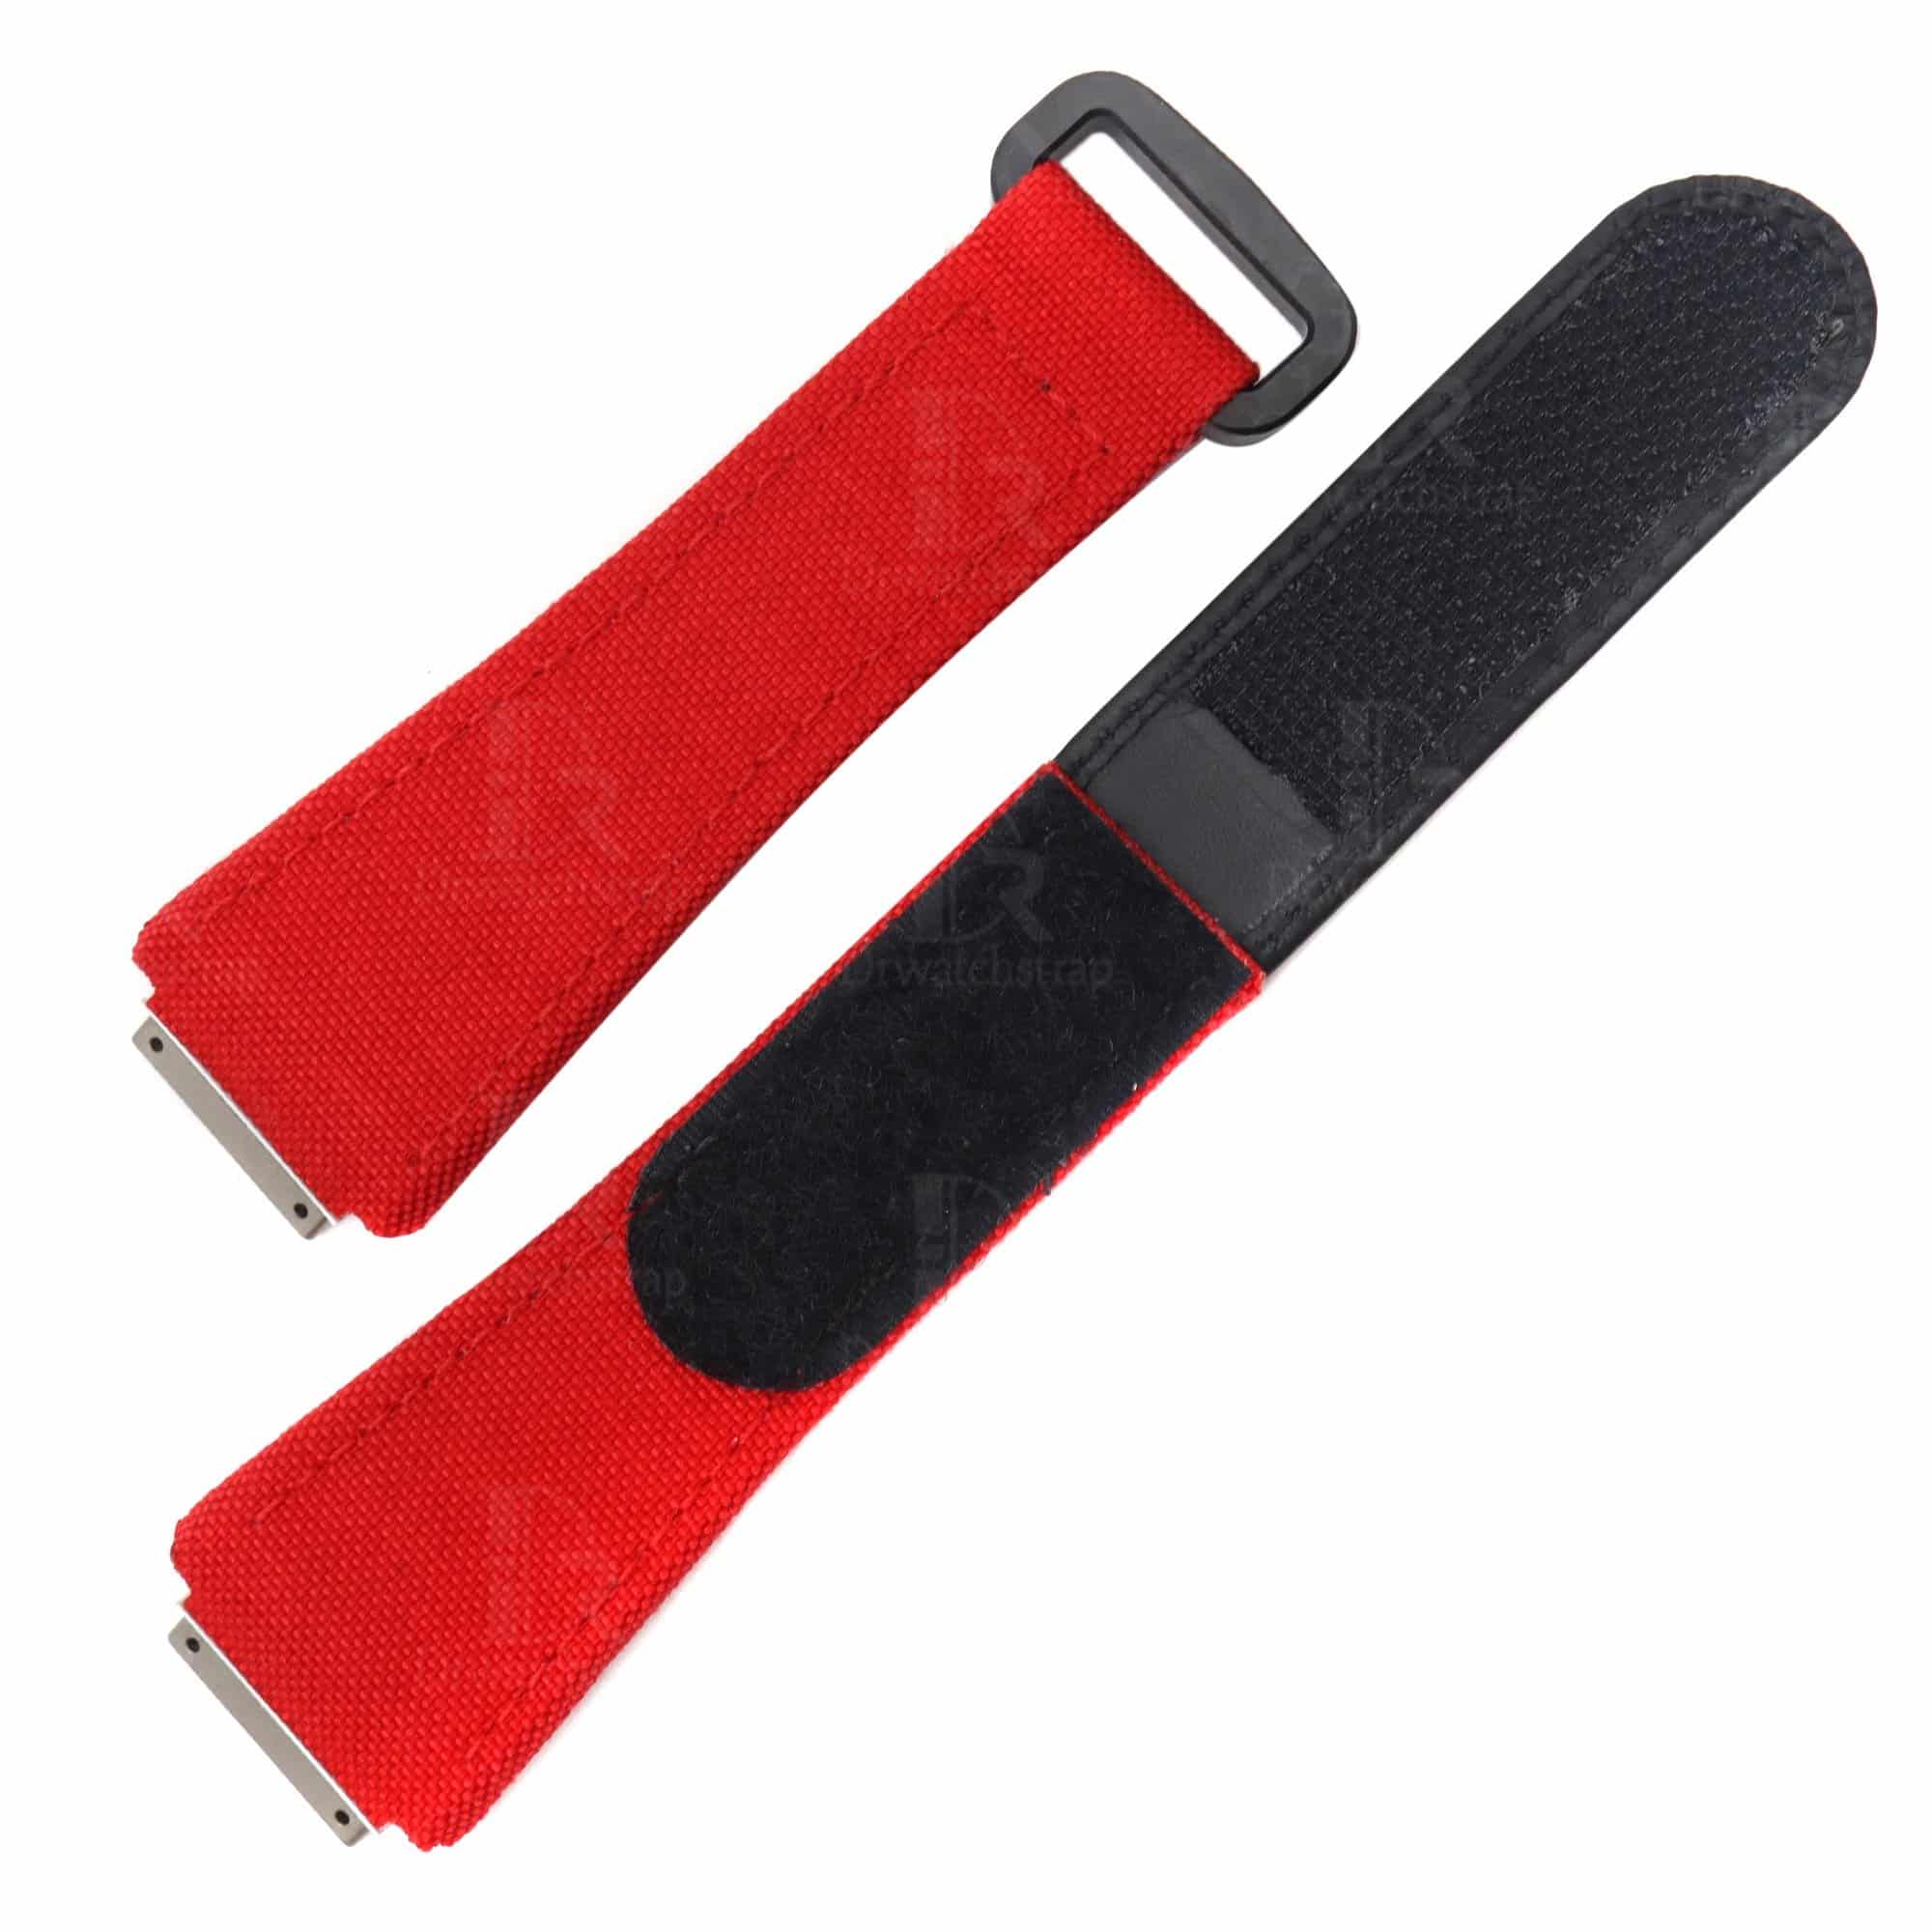 Richard Mille velcro strap red replacement watch band